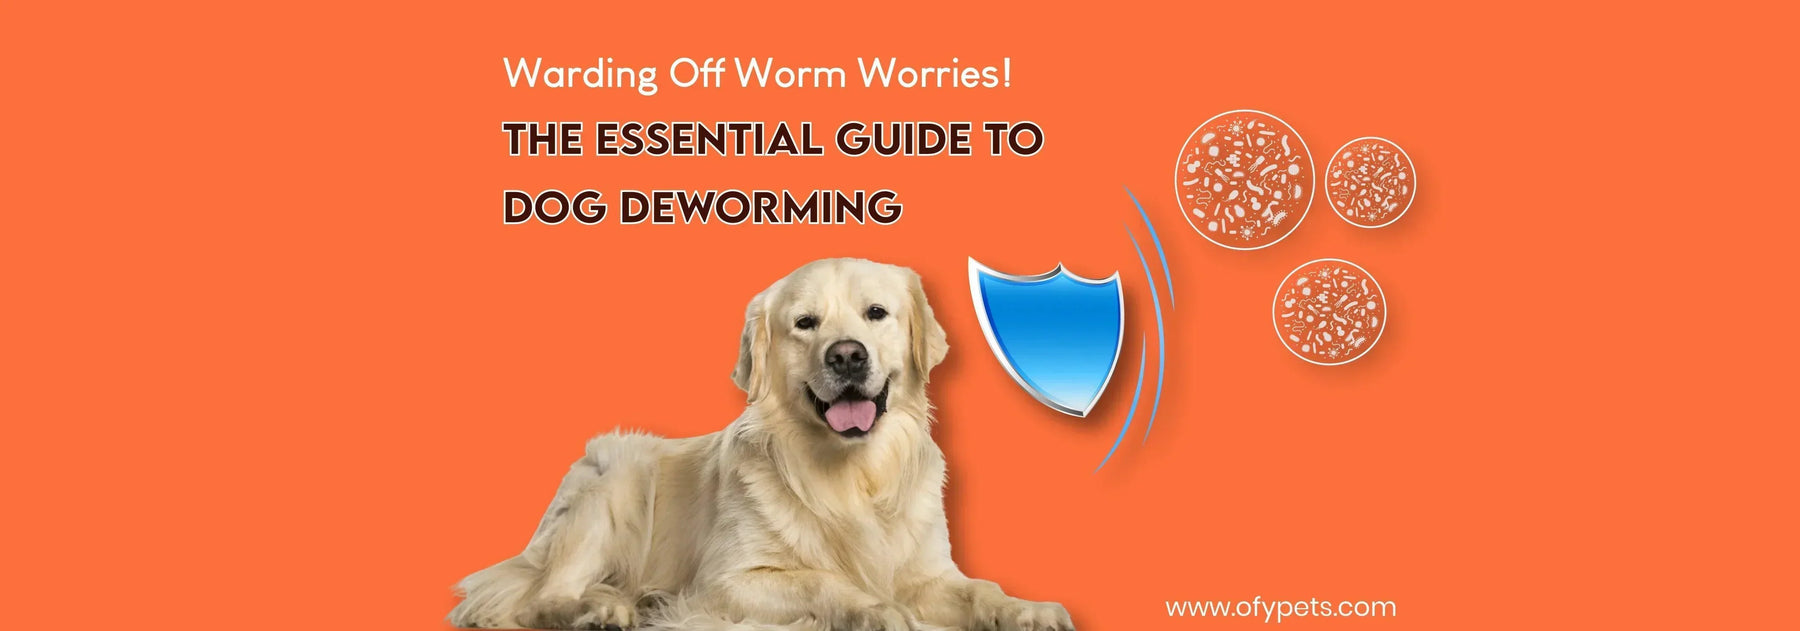 Warding Off Worm Worries: The Essential Guide to Dog Deworming - Ofypets